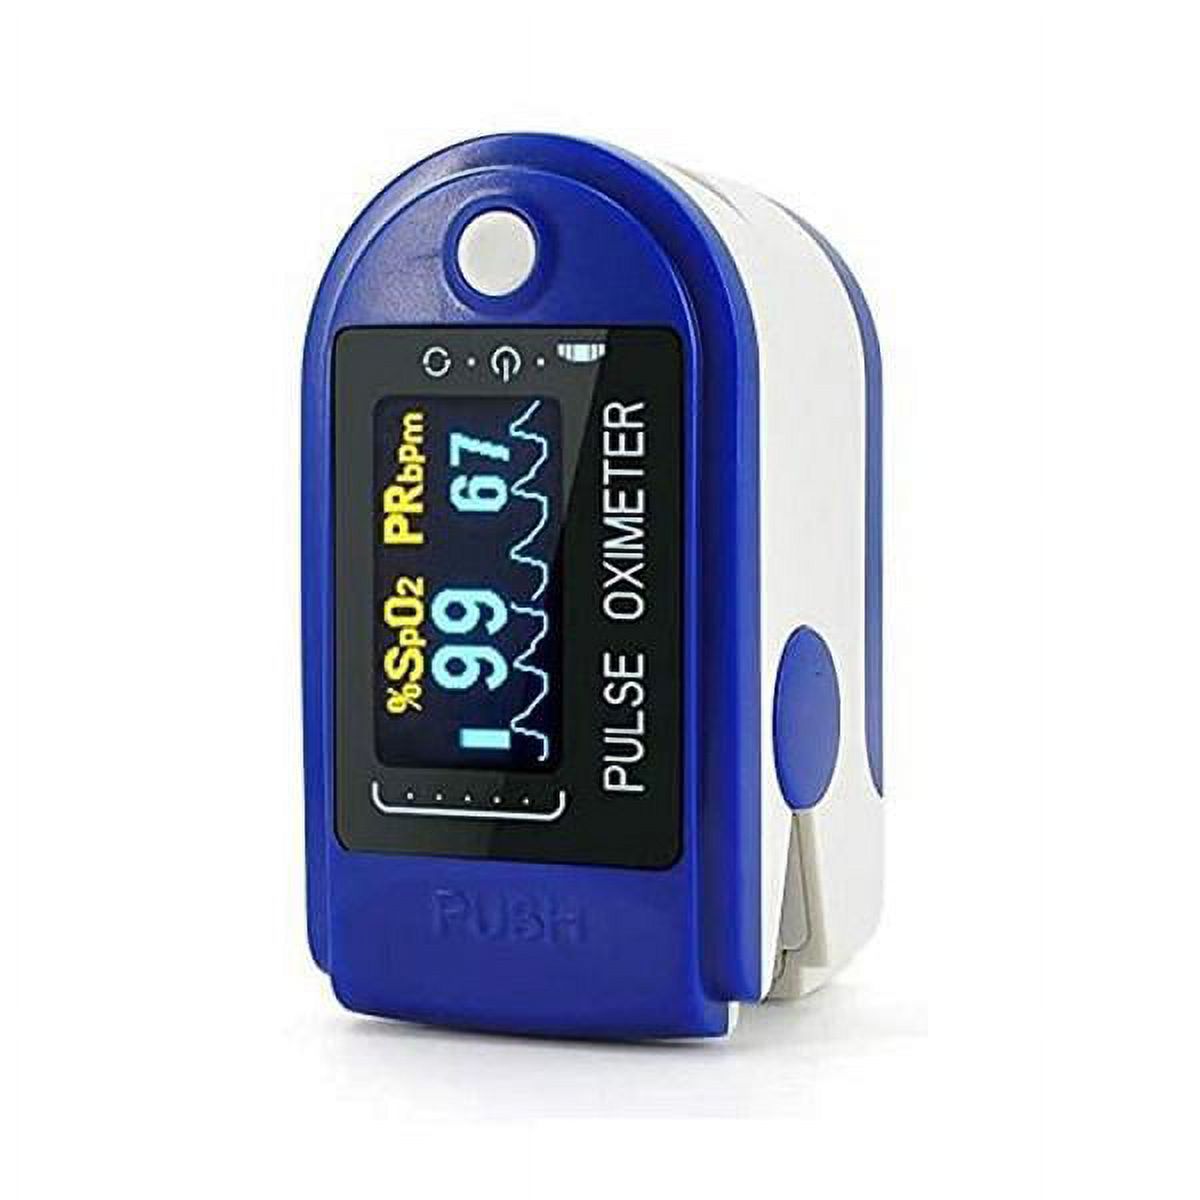 Finger Pulse Oximeter Blood Oxygen Saturation SpO2 Heart Rate O2 Monitor CE - Blue, New - image 2 of 11